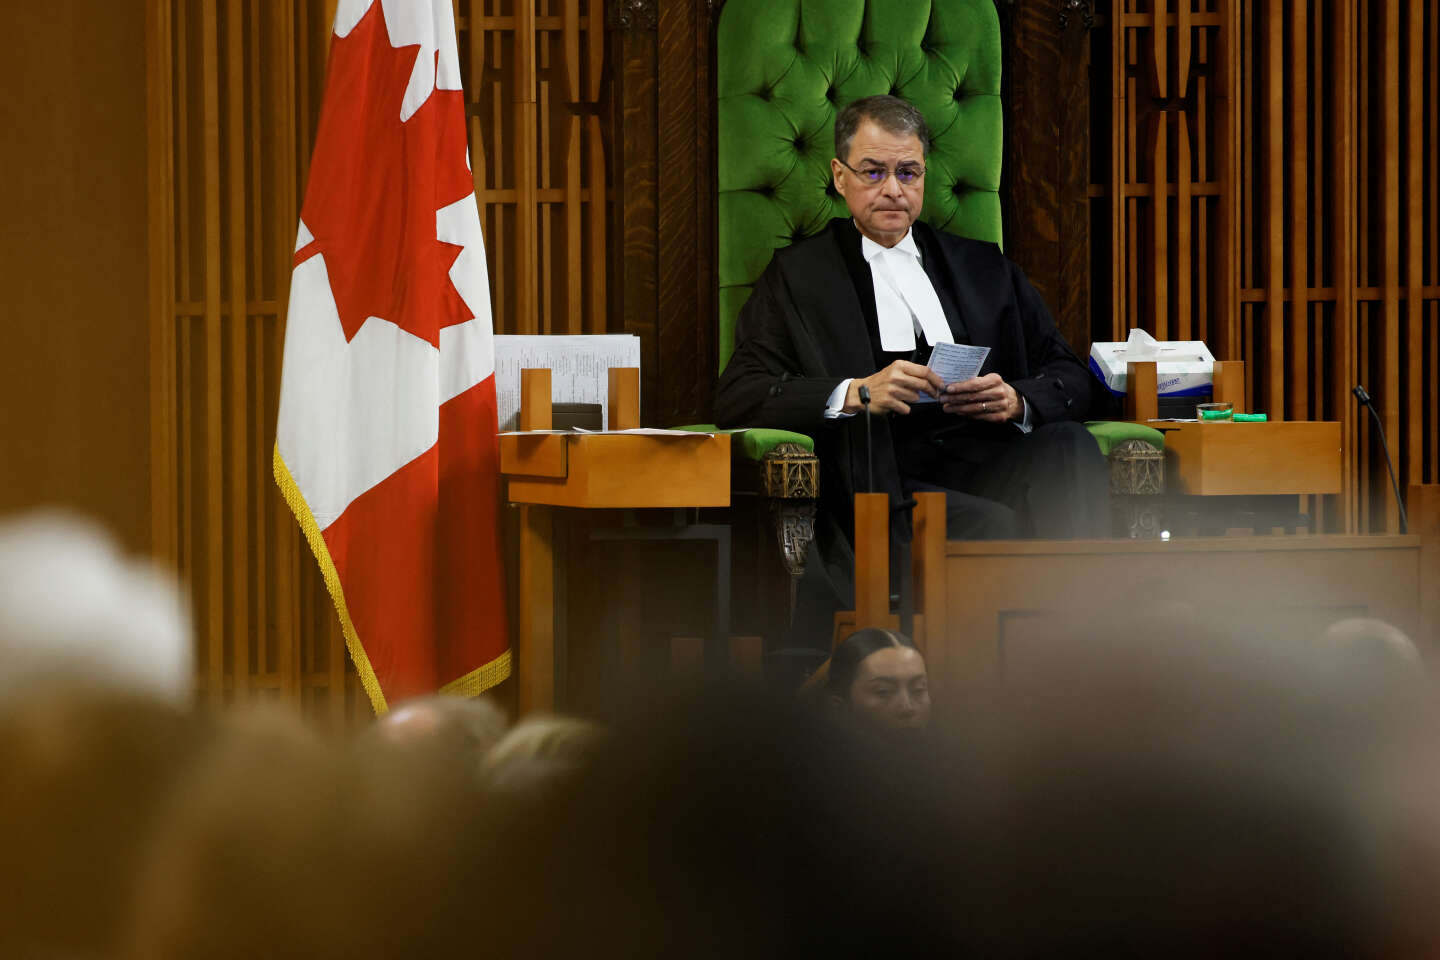 under pressure, the President of the Canadian Parliament resigns